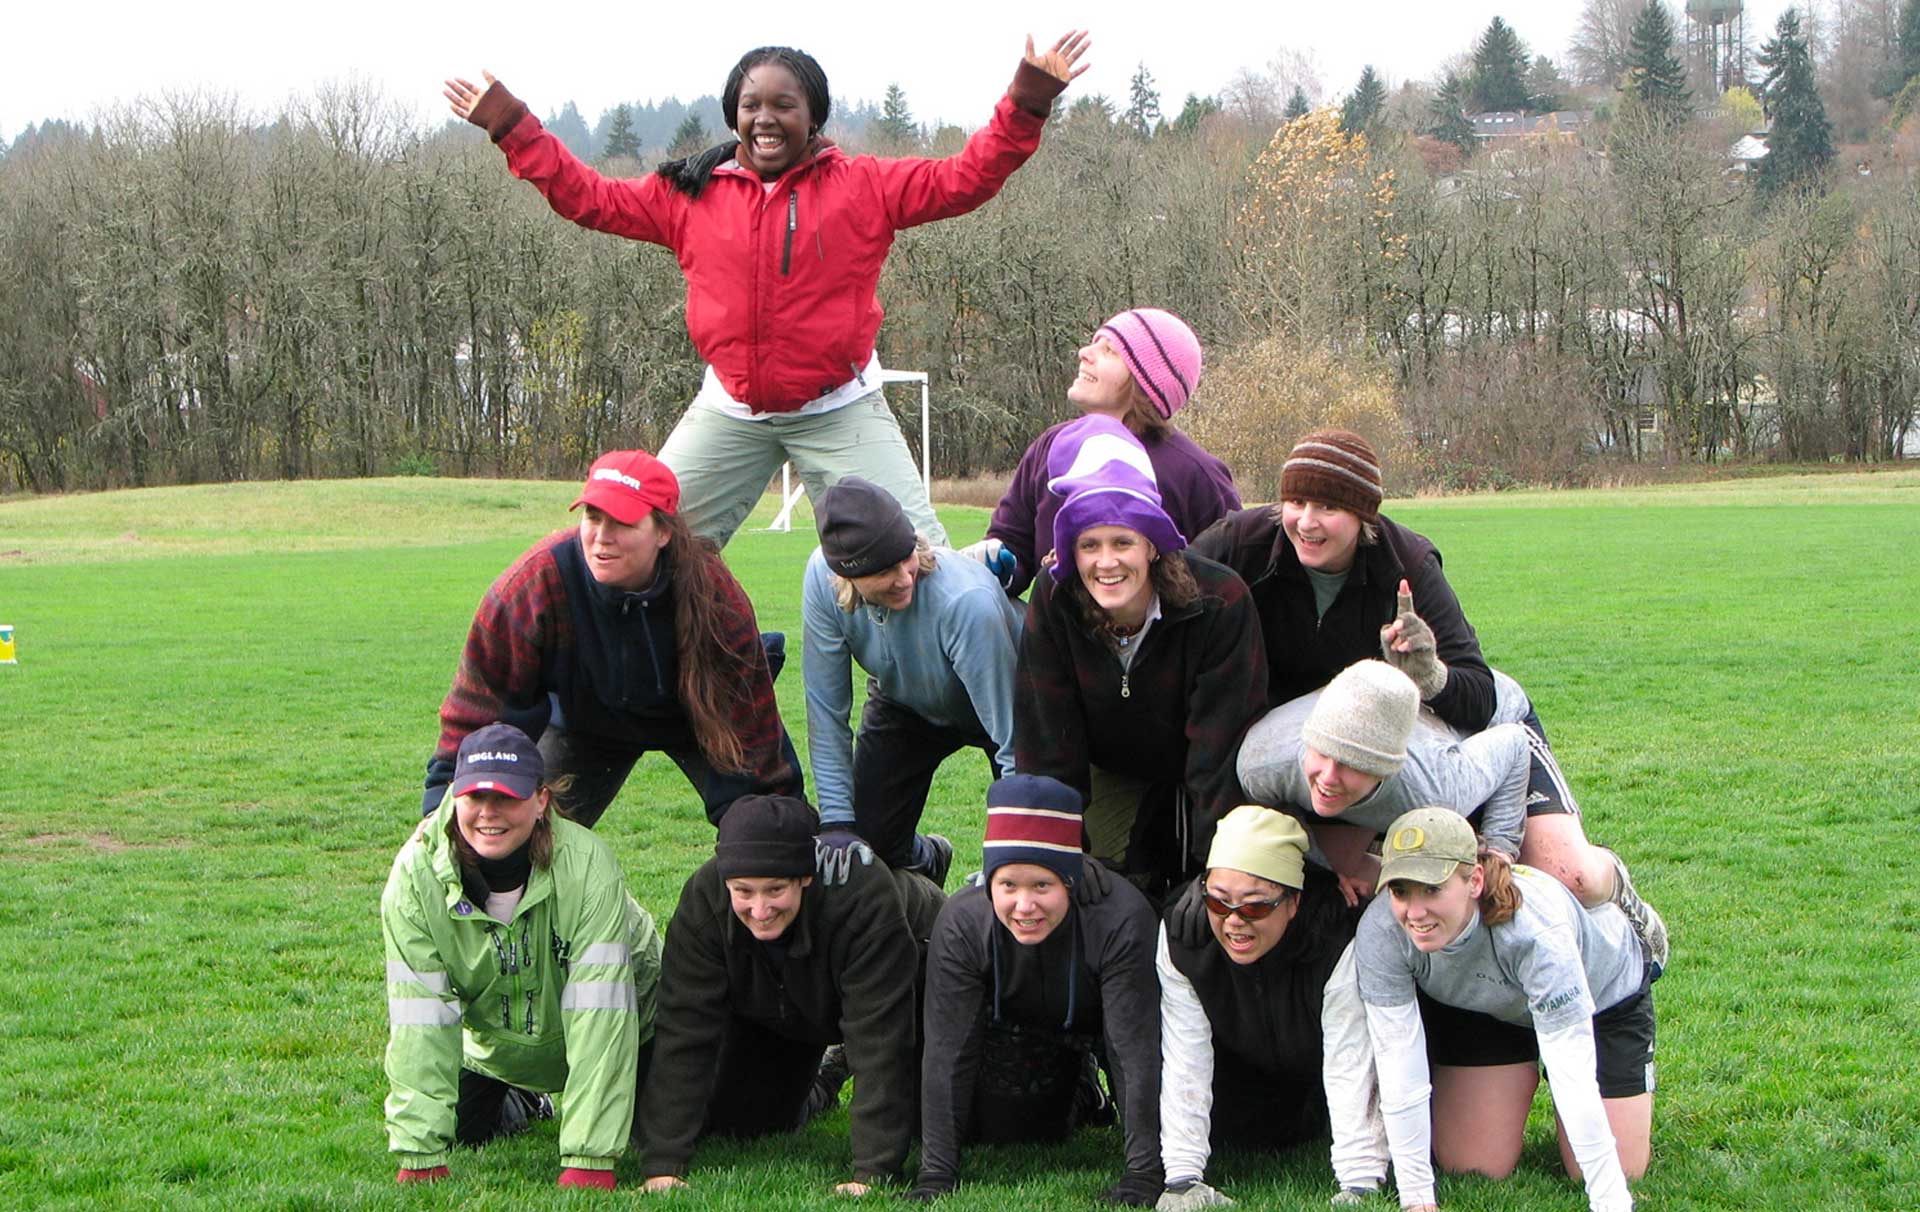 A group posing in a pyramid on a football field.